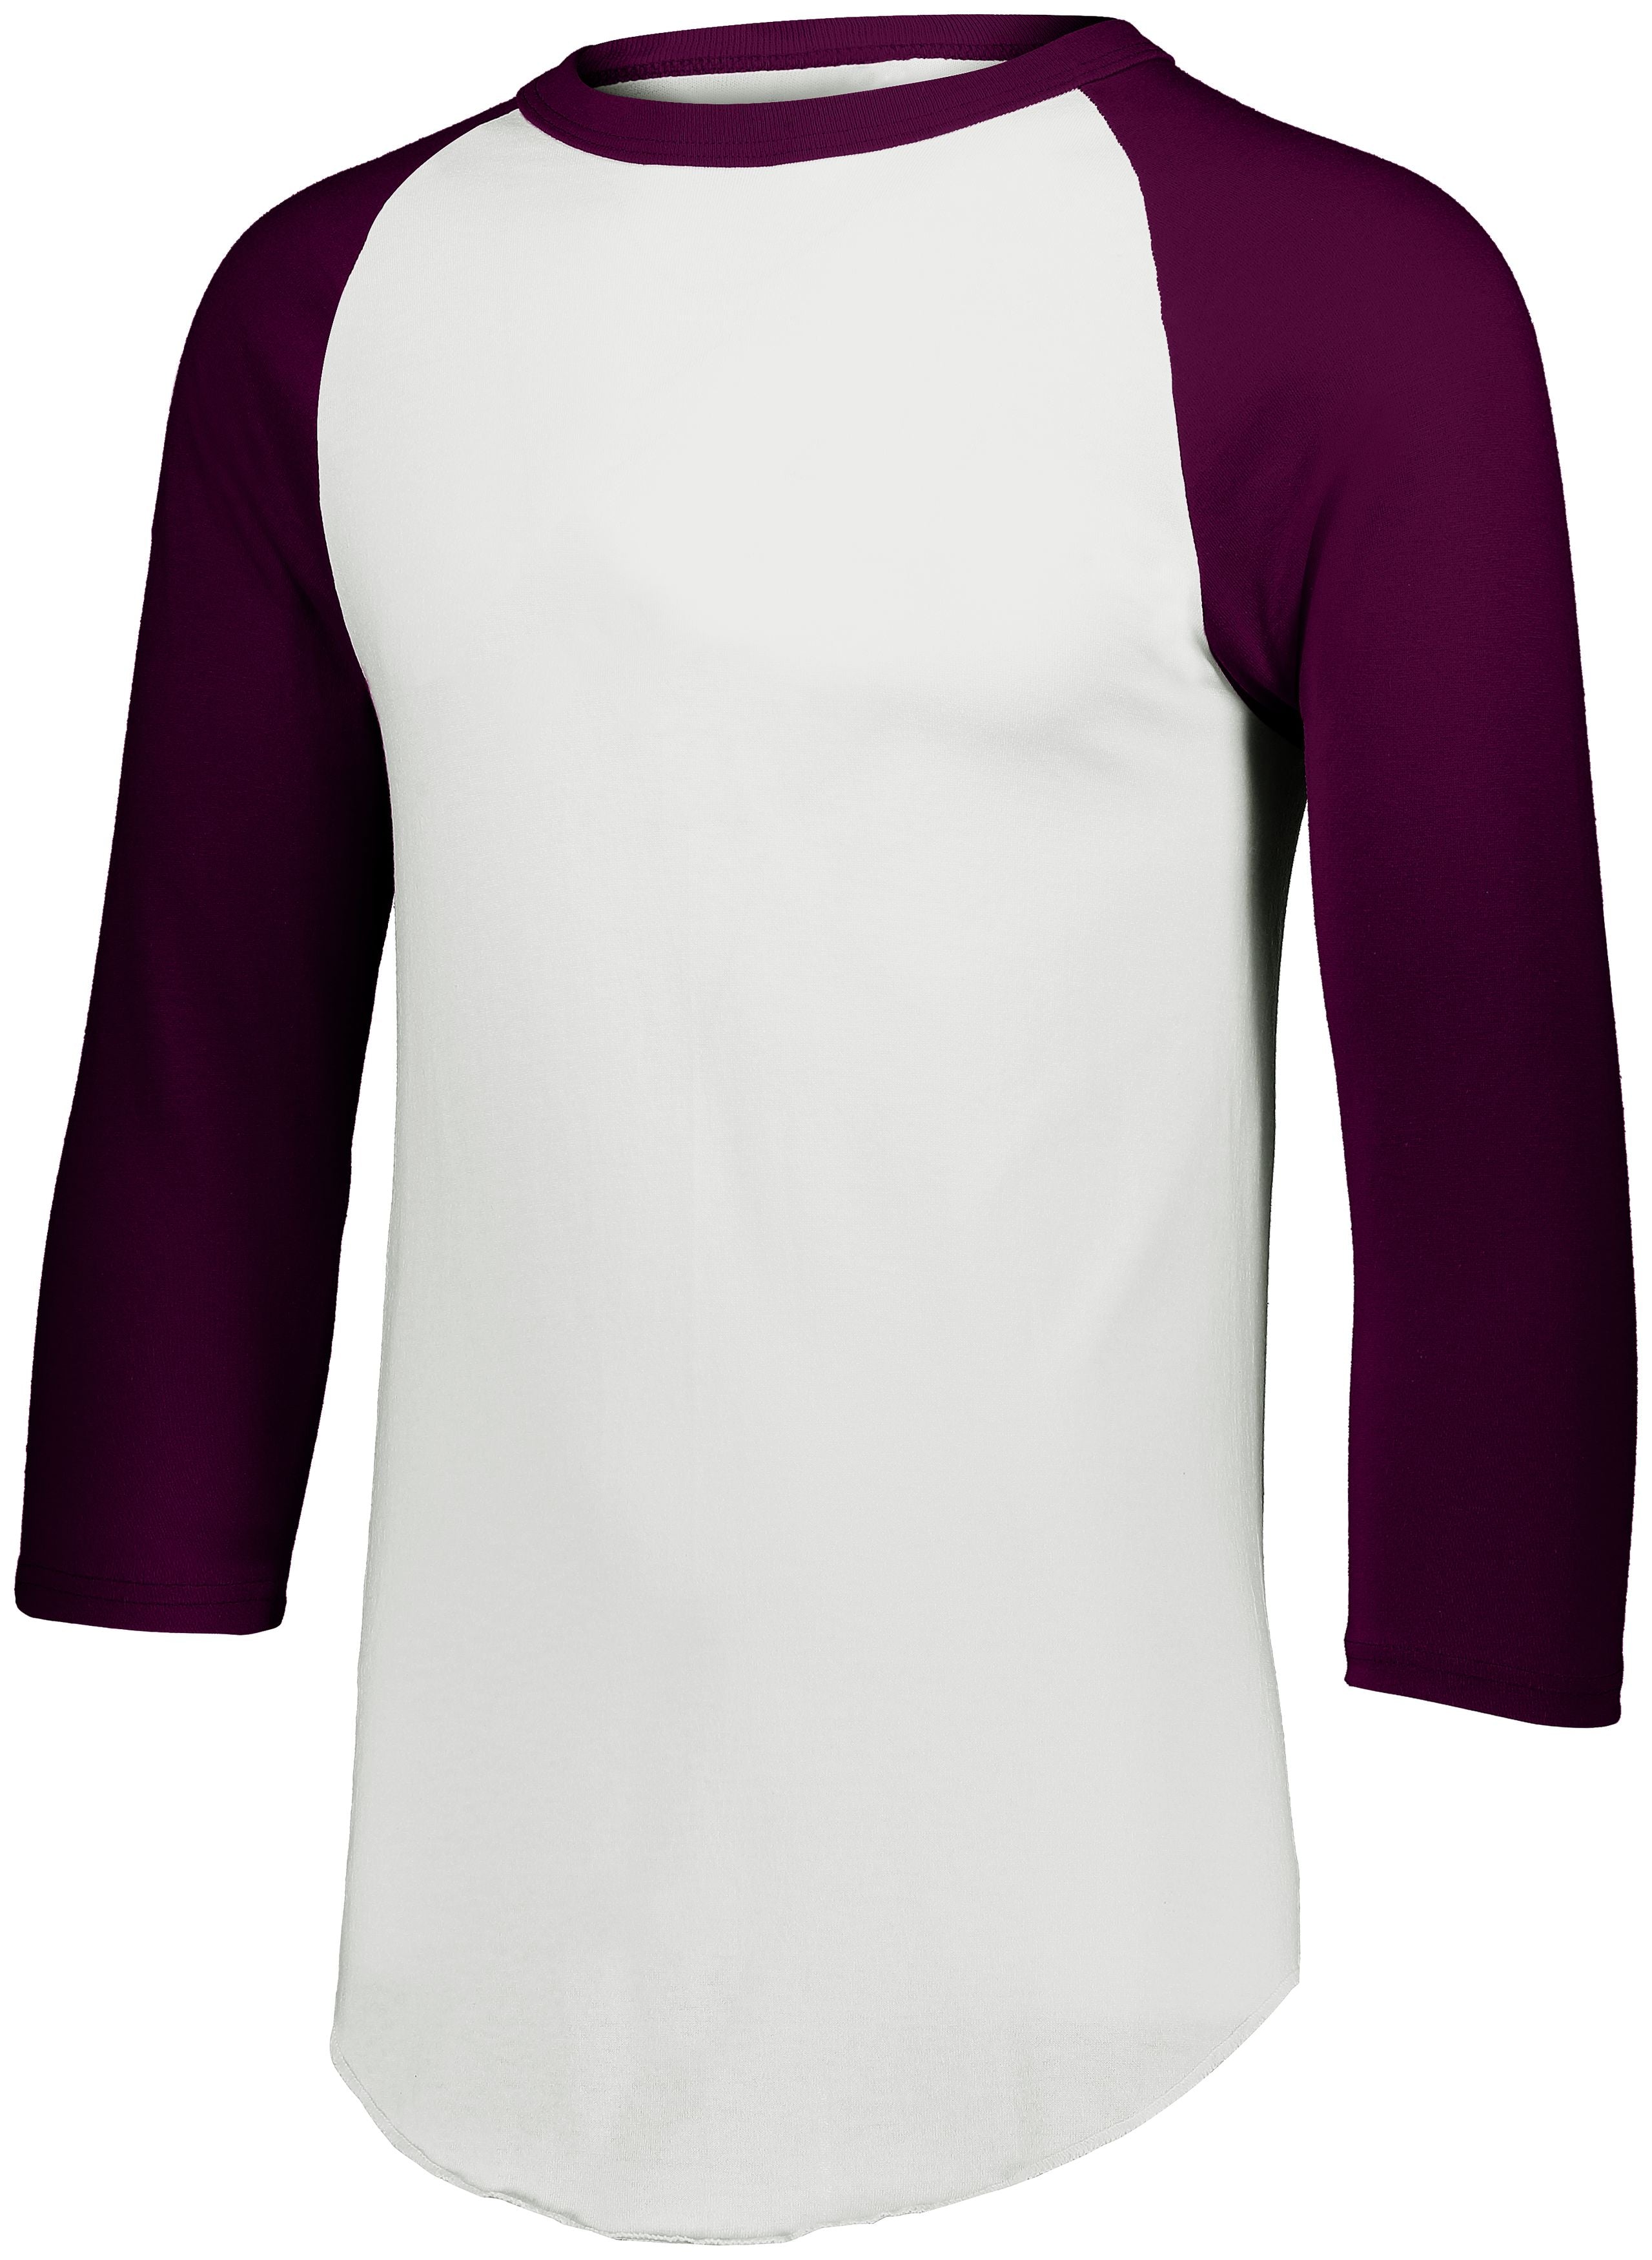 Augusta Sportswear Youth Baseball Jersey 2.0 in White/Maroon  -Part of the Youth, Youth-Jersey, Augusta-Products, Baseball, Shirts, All-Sports, All-Sports-1 product lines at KanaleyCreations.com